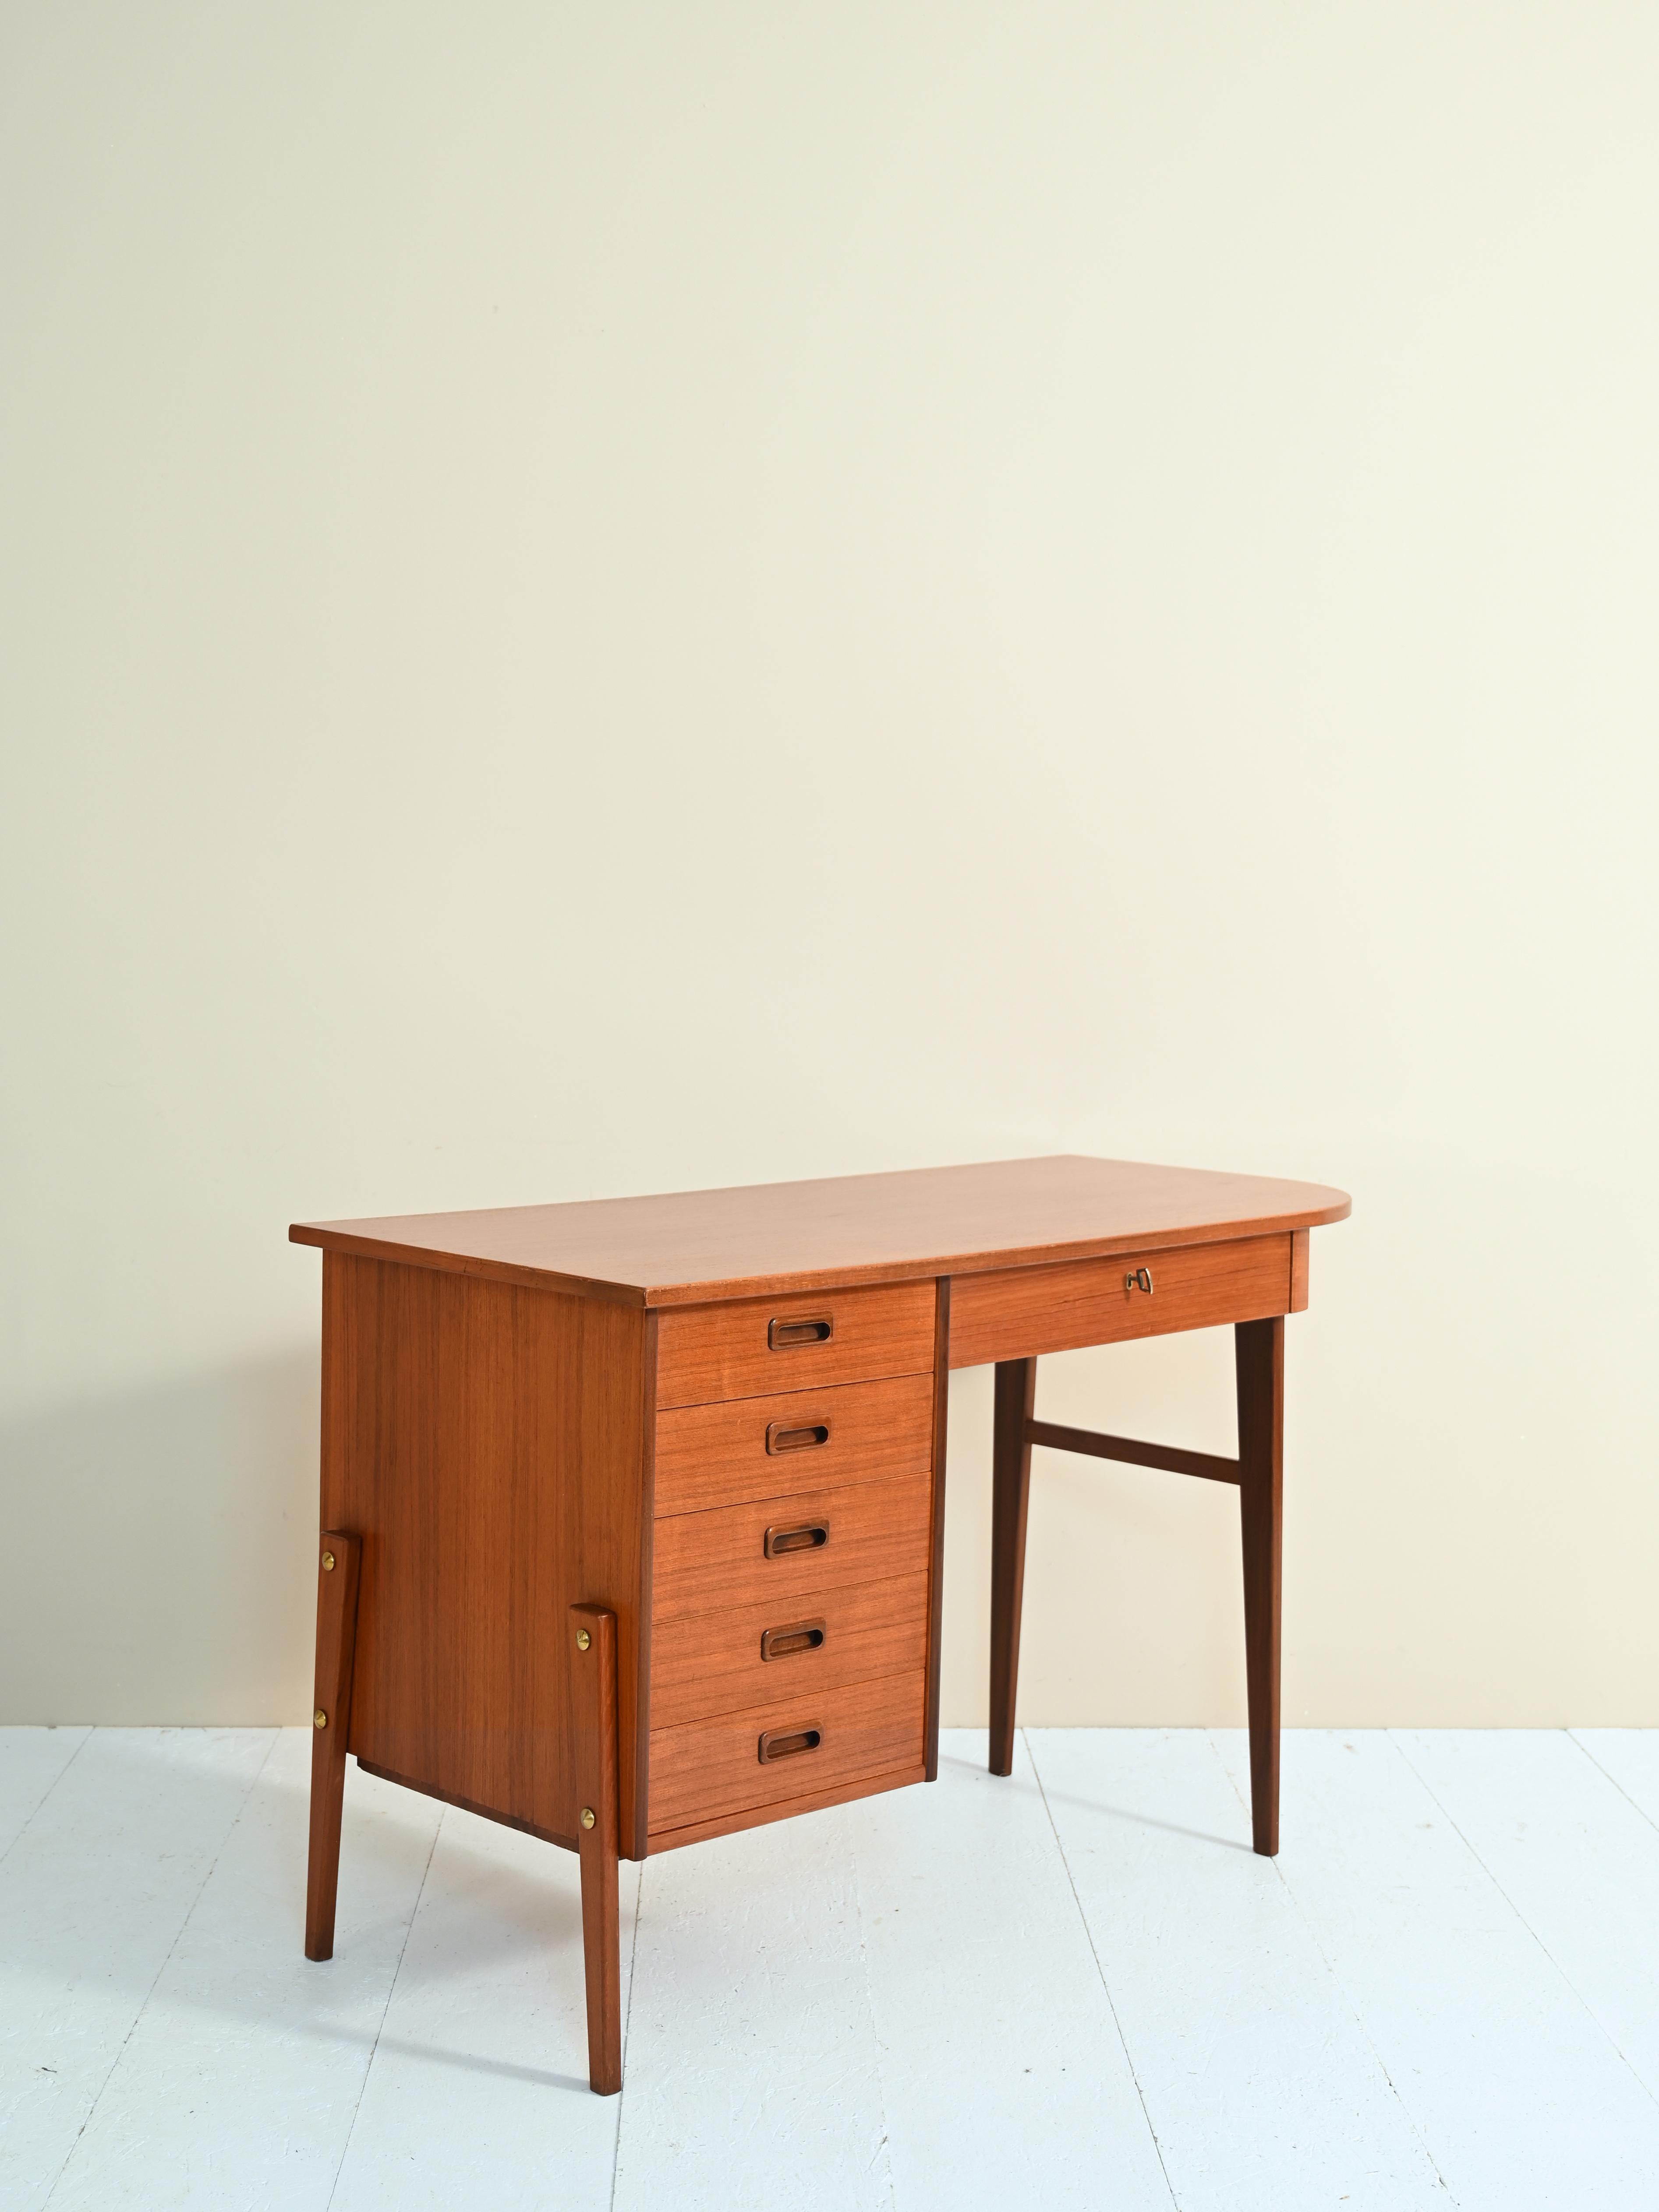 Mid-20th Century Vintage Desk with Drawers